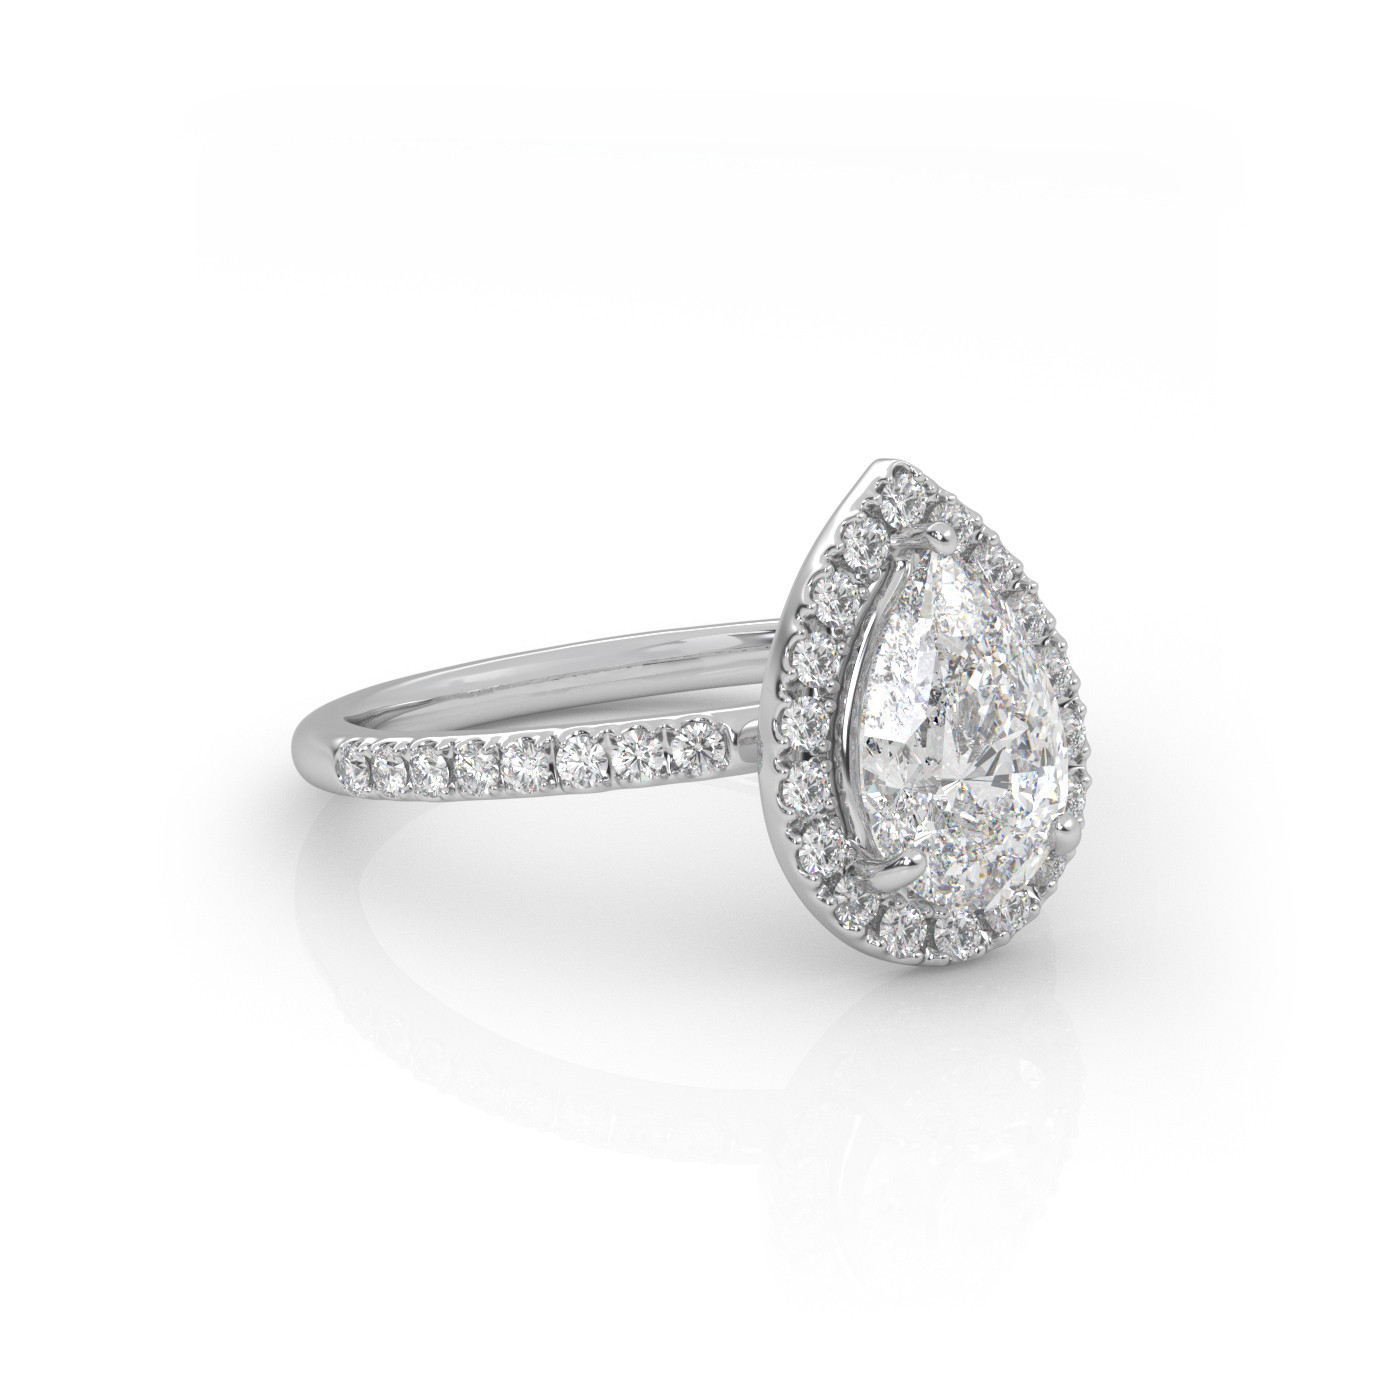 18K WHITE GOLD Pear Shaped Diamond Engagament Ring with Halo and Pave style